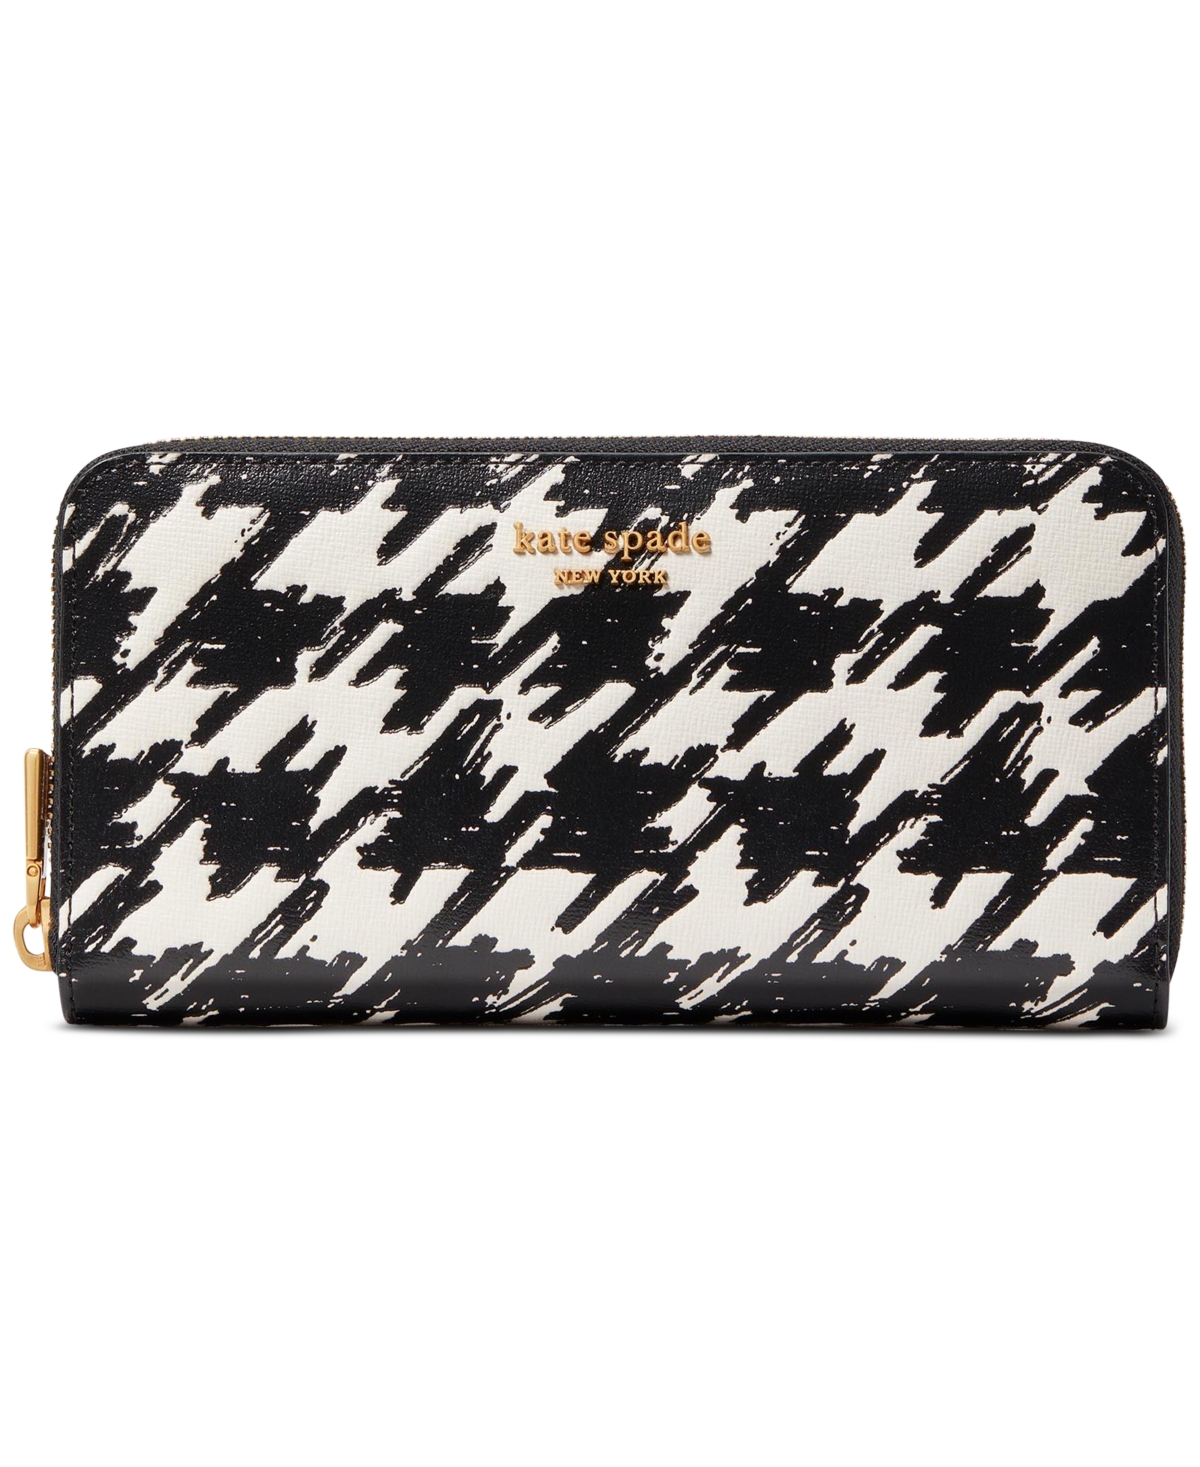 Kate Spade Morgan Painterly Houndstooth Embossed Saffiano Leather Zip Around Continental Wallet In Black